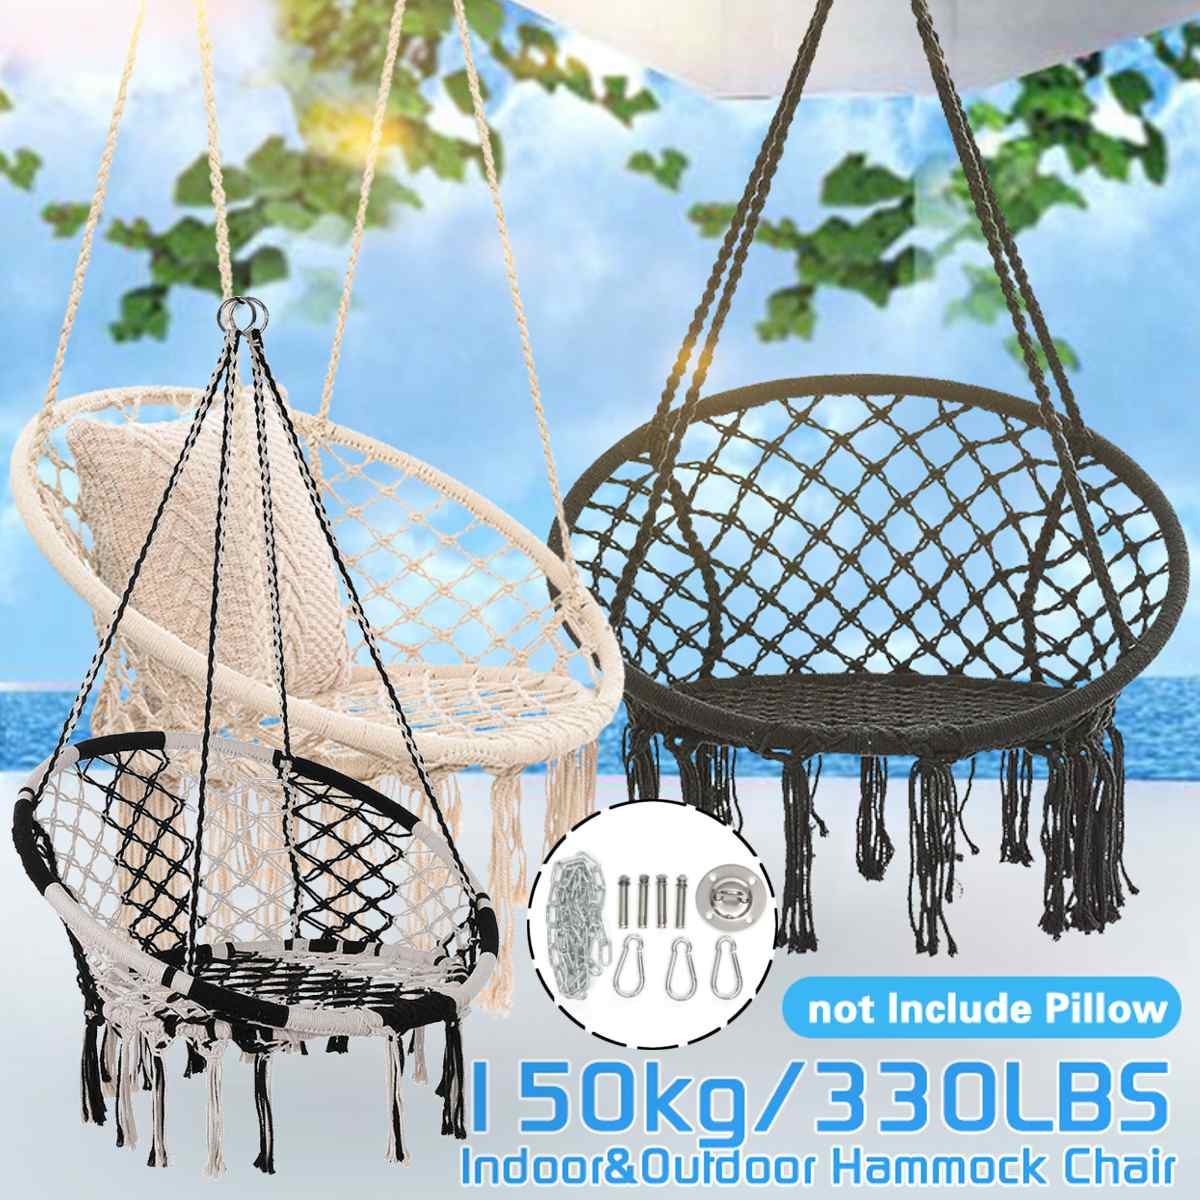 History Review On 150kg Nordic, Round Porch Swing Chair